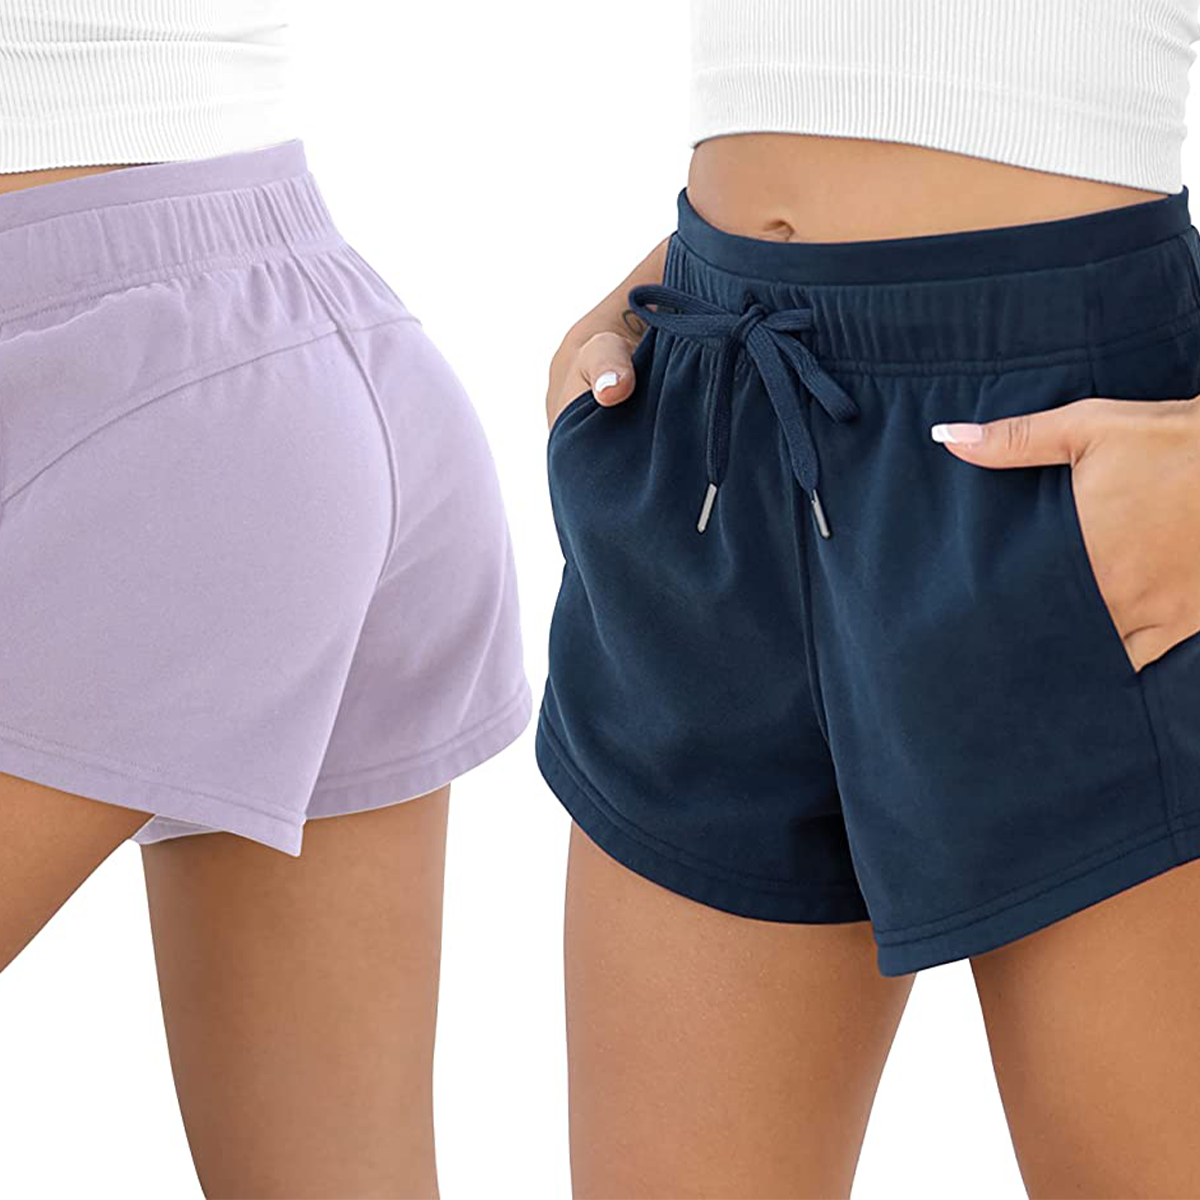 Amazon Reviewers Say These $22 Lounge Shorts Are “Very Comfortable”